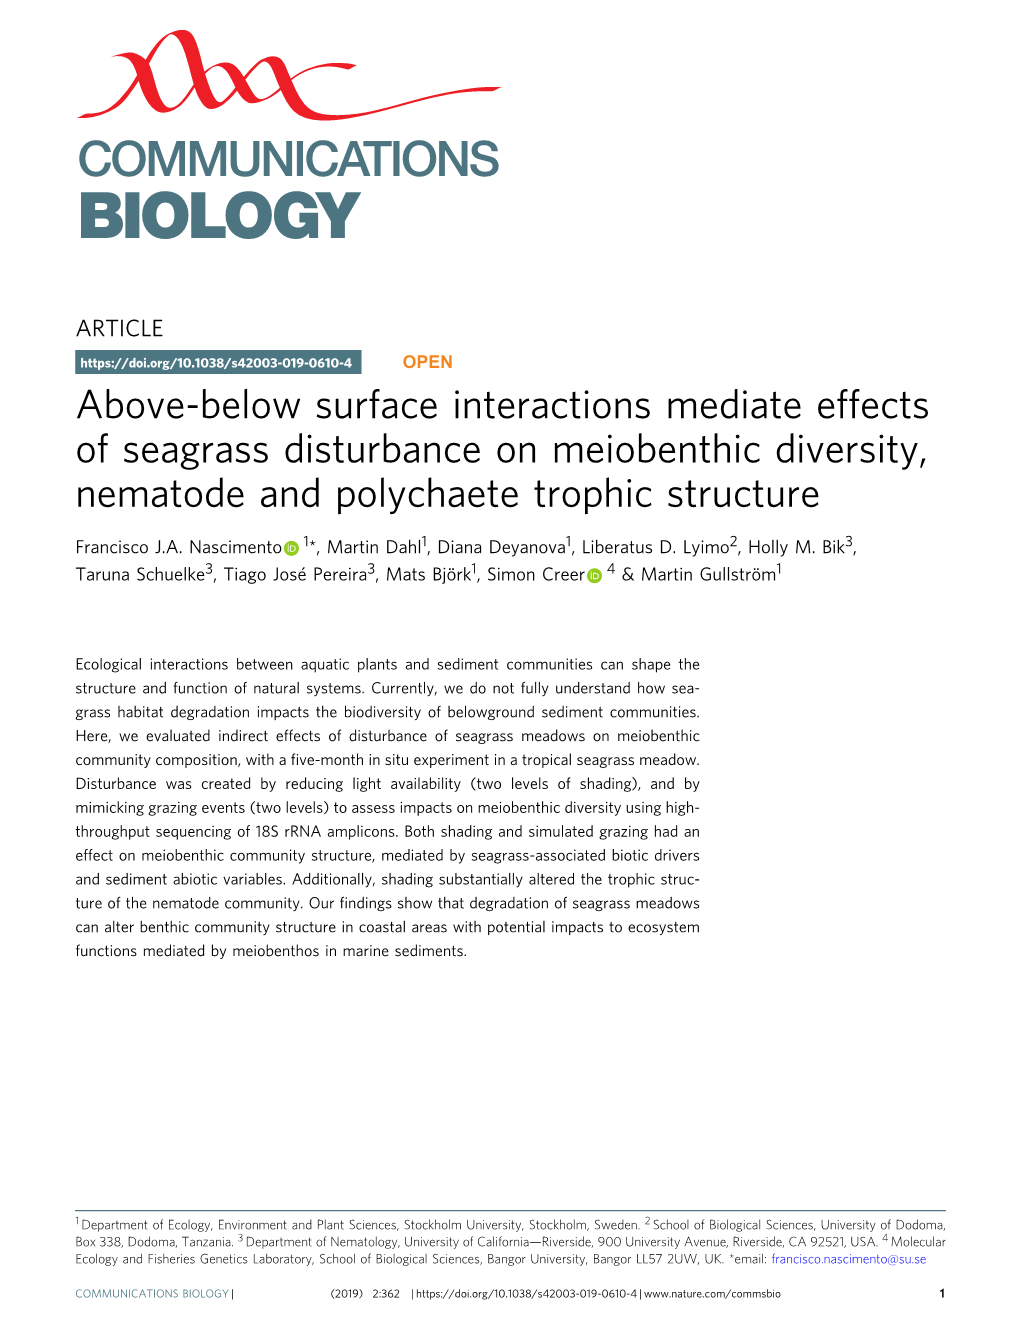 Above-Below Surface Interactions Mediate Effects of Seagrass Disturbance on Meiobenthic Diversity, Nematode and Polychaete Trophic Structure